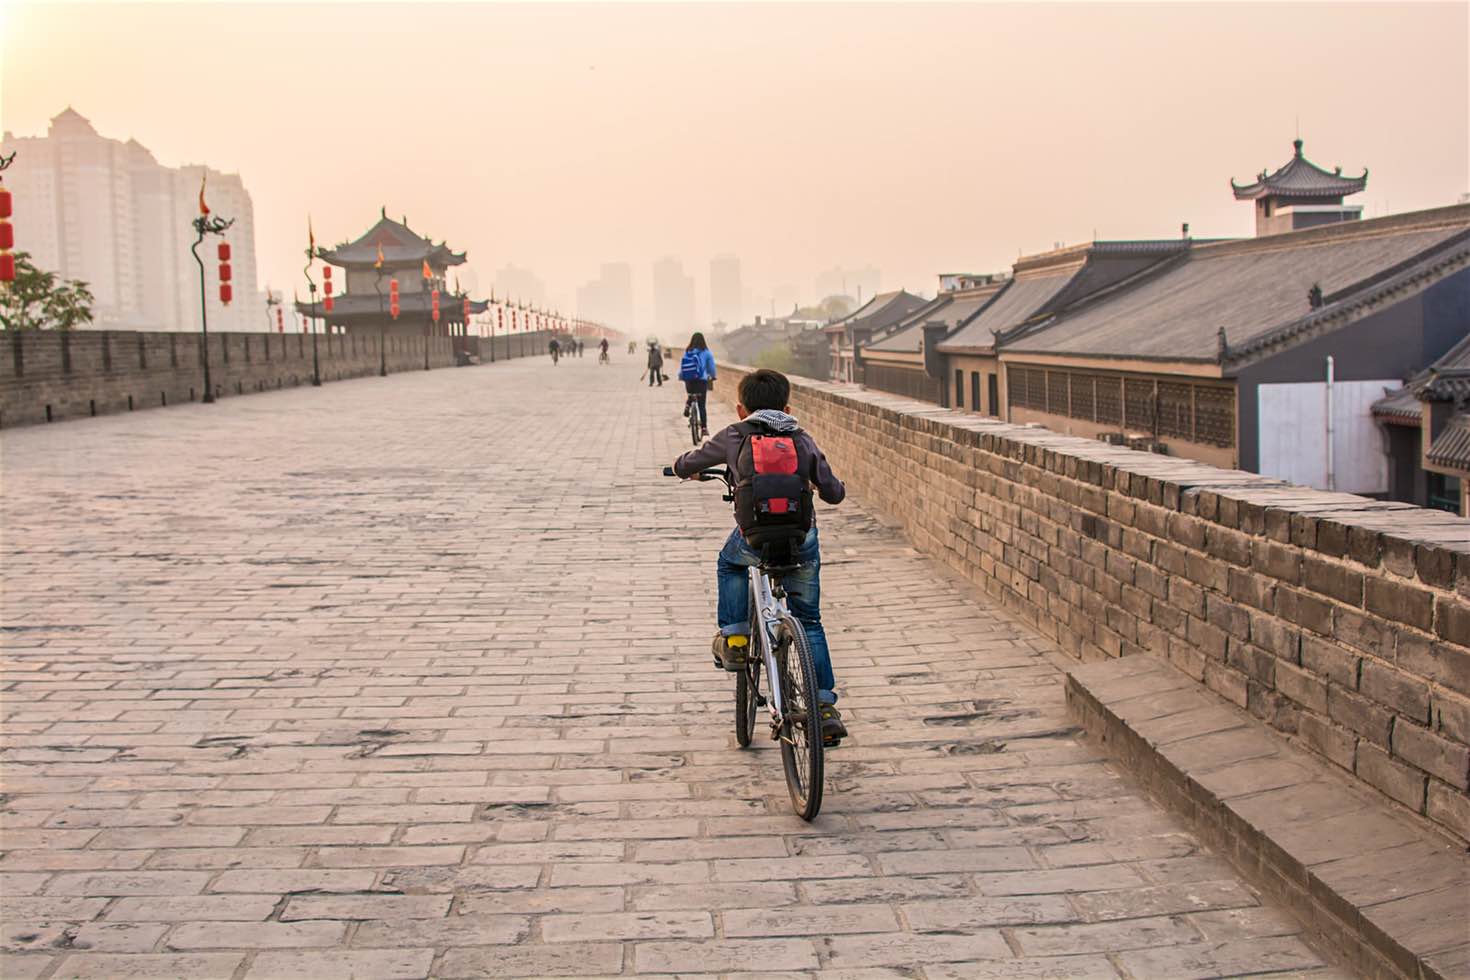 1581204970 411 Tour of the Chinese city of Xian - Tour of the Chinese city of Xi'an